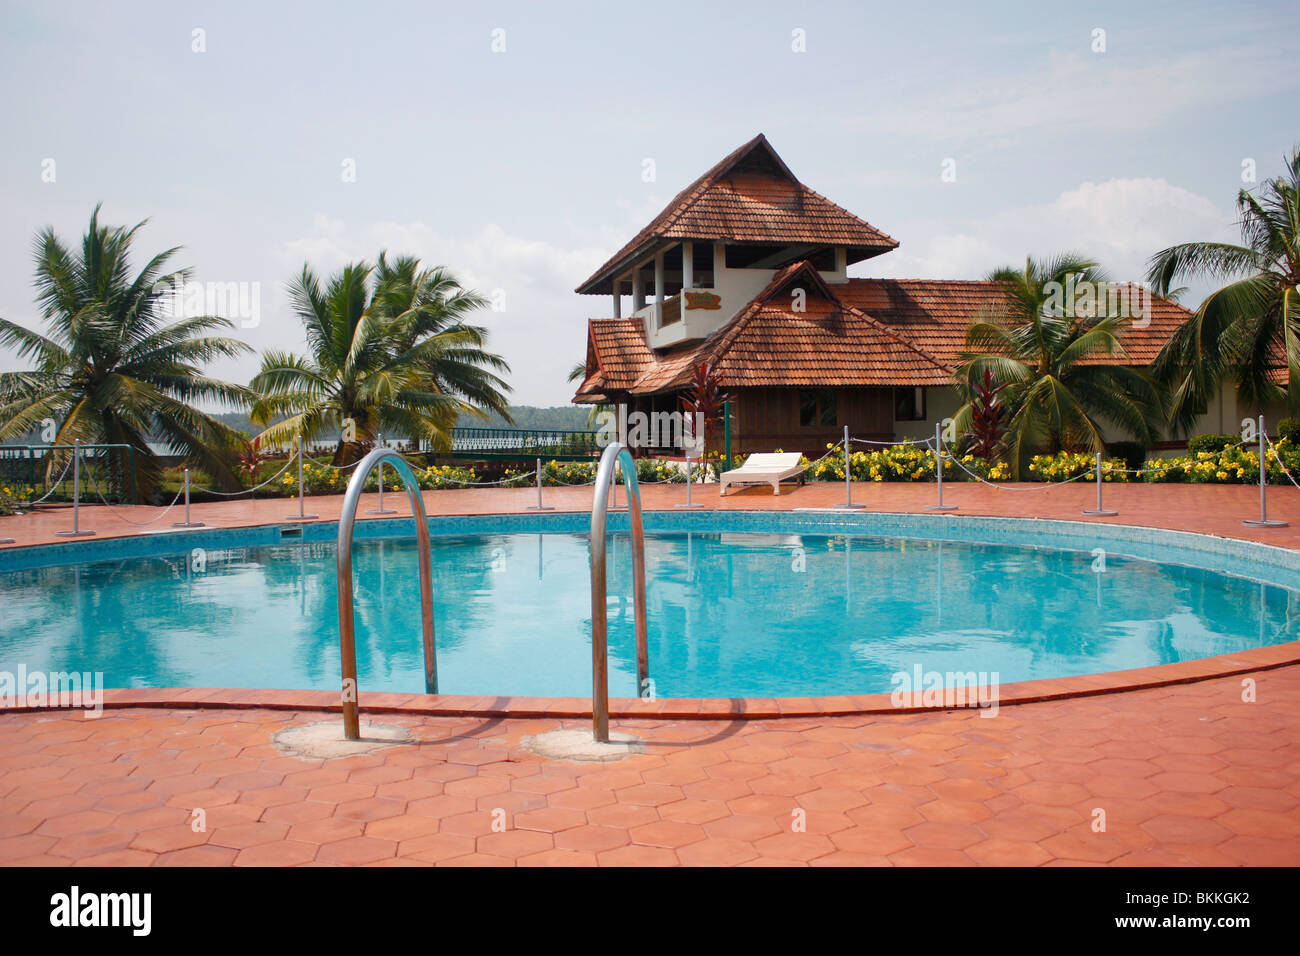 Resort with a swimming pool side view Stock Photo